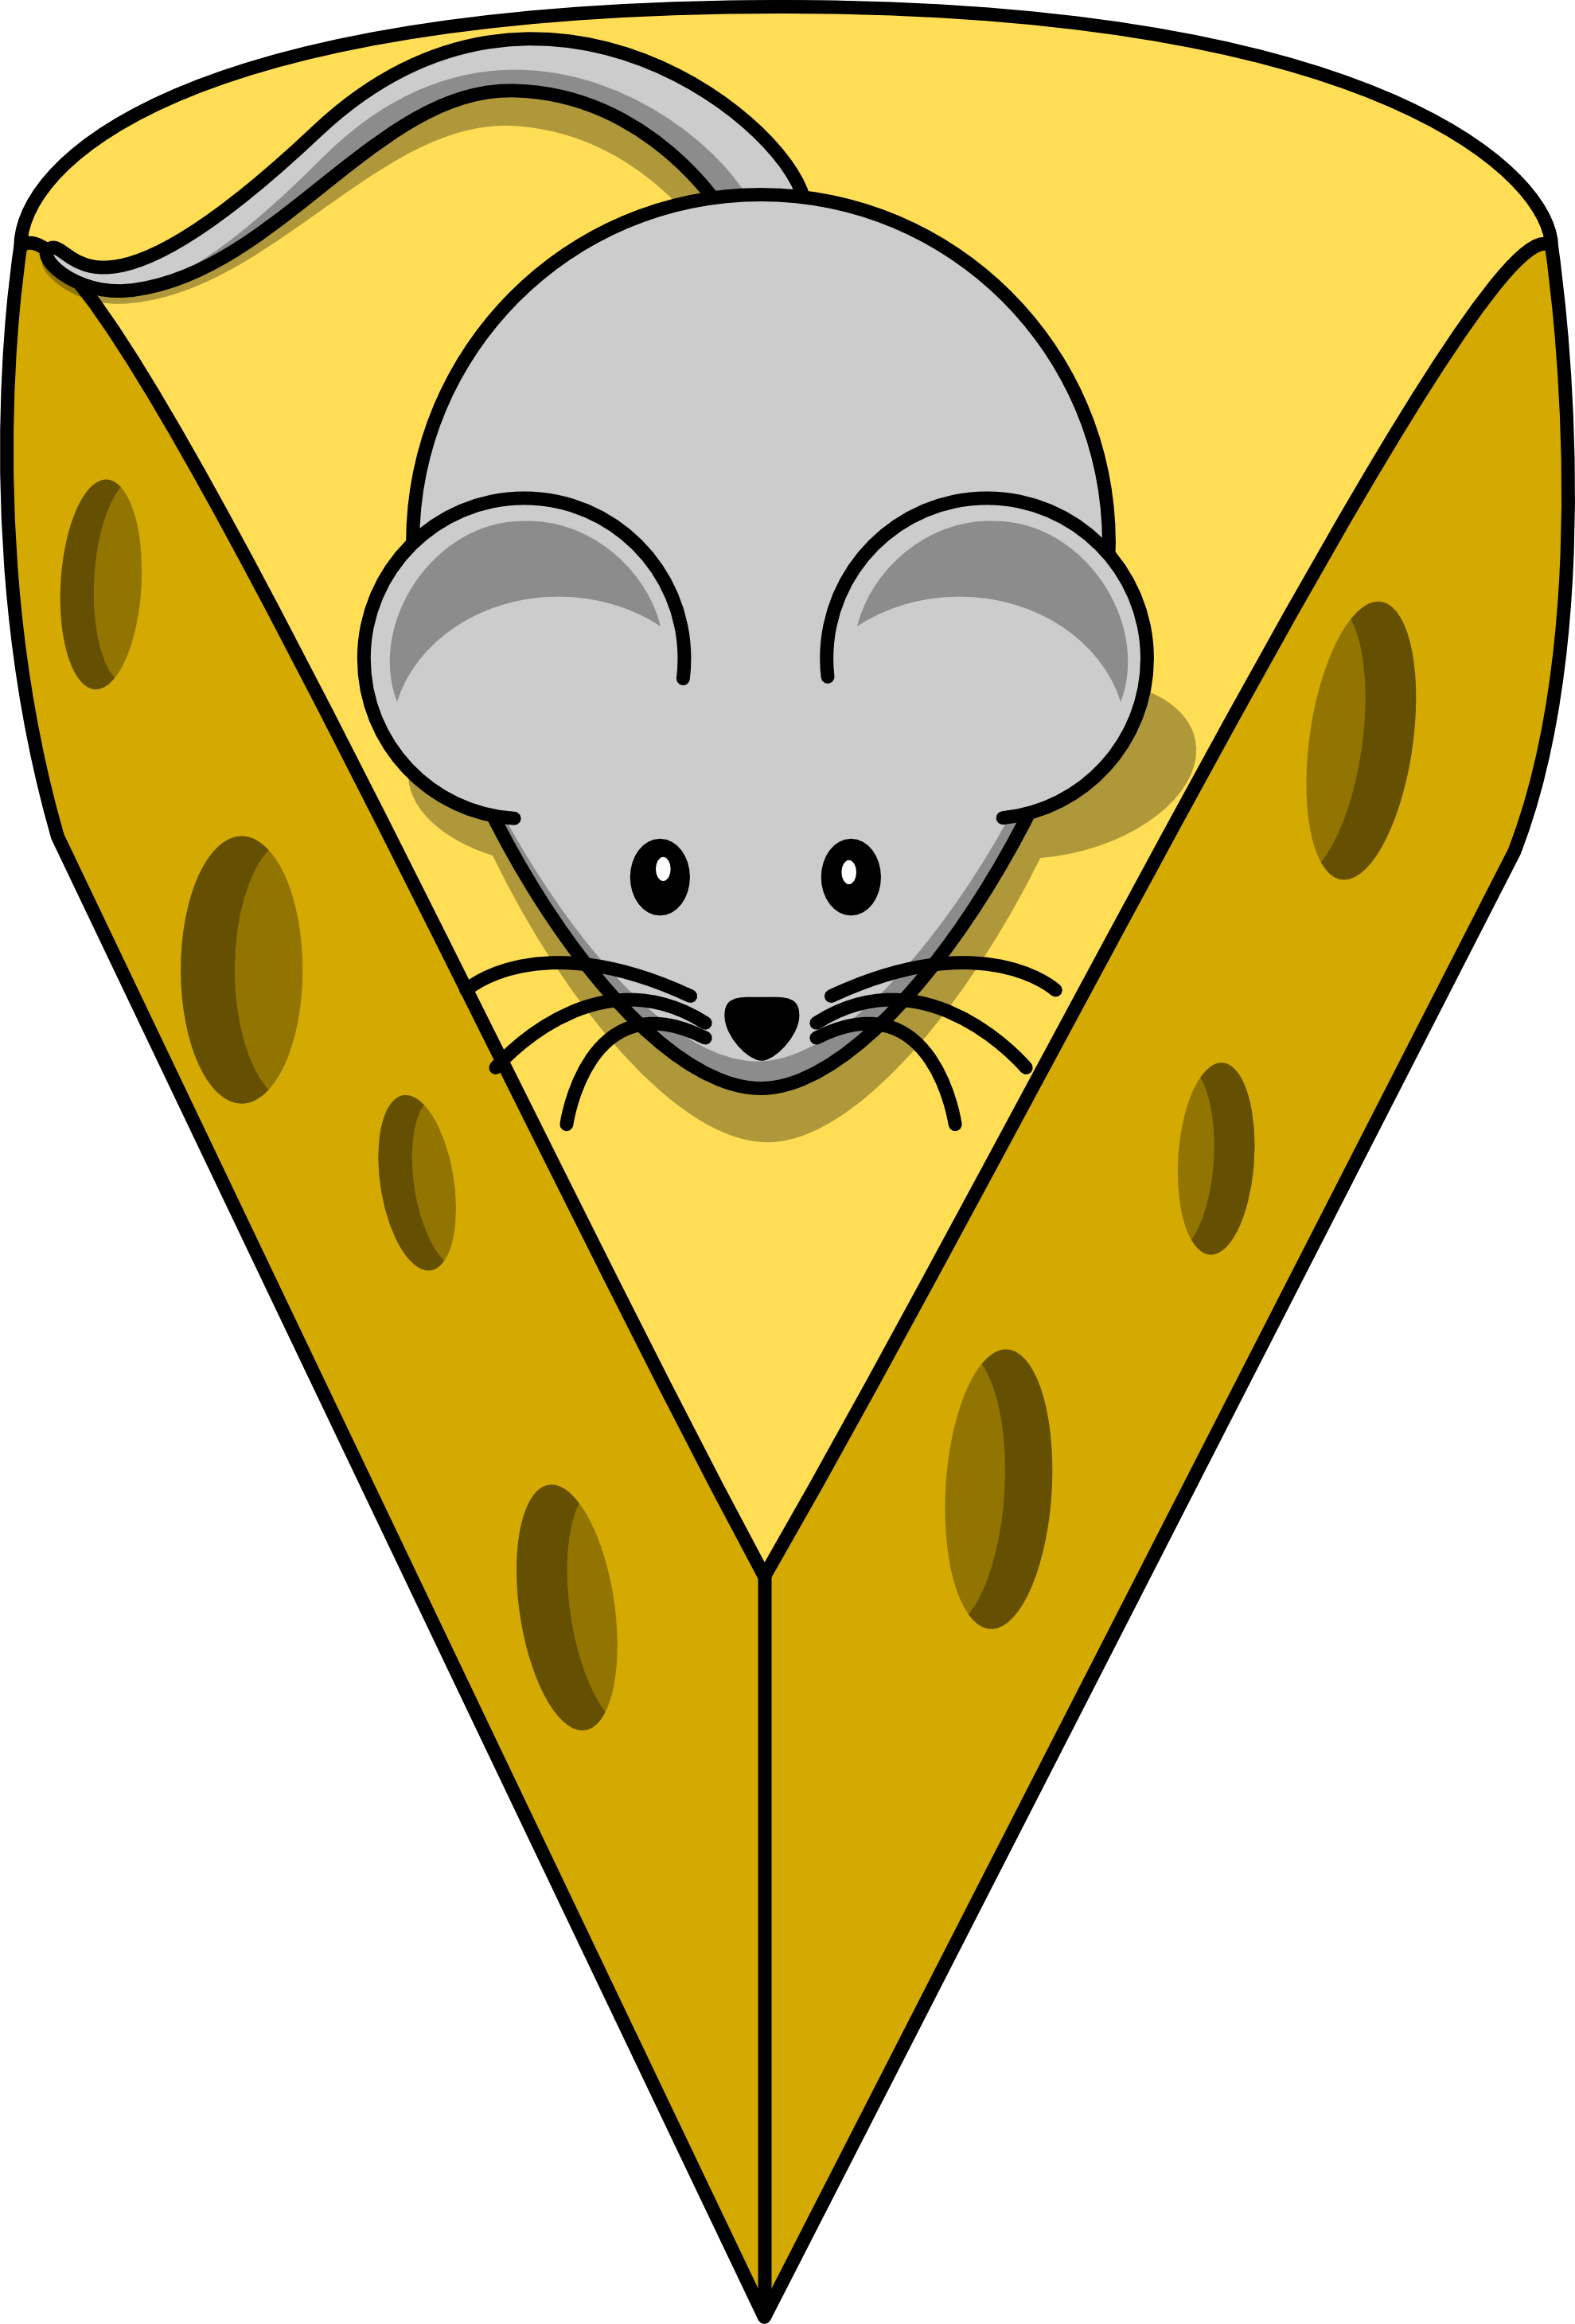 Cheese panda free images. Mouse clipart cute mouse